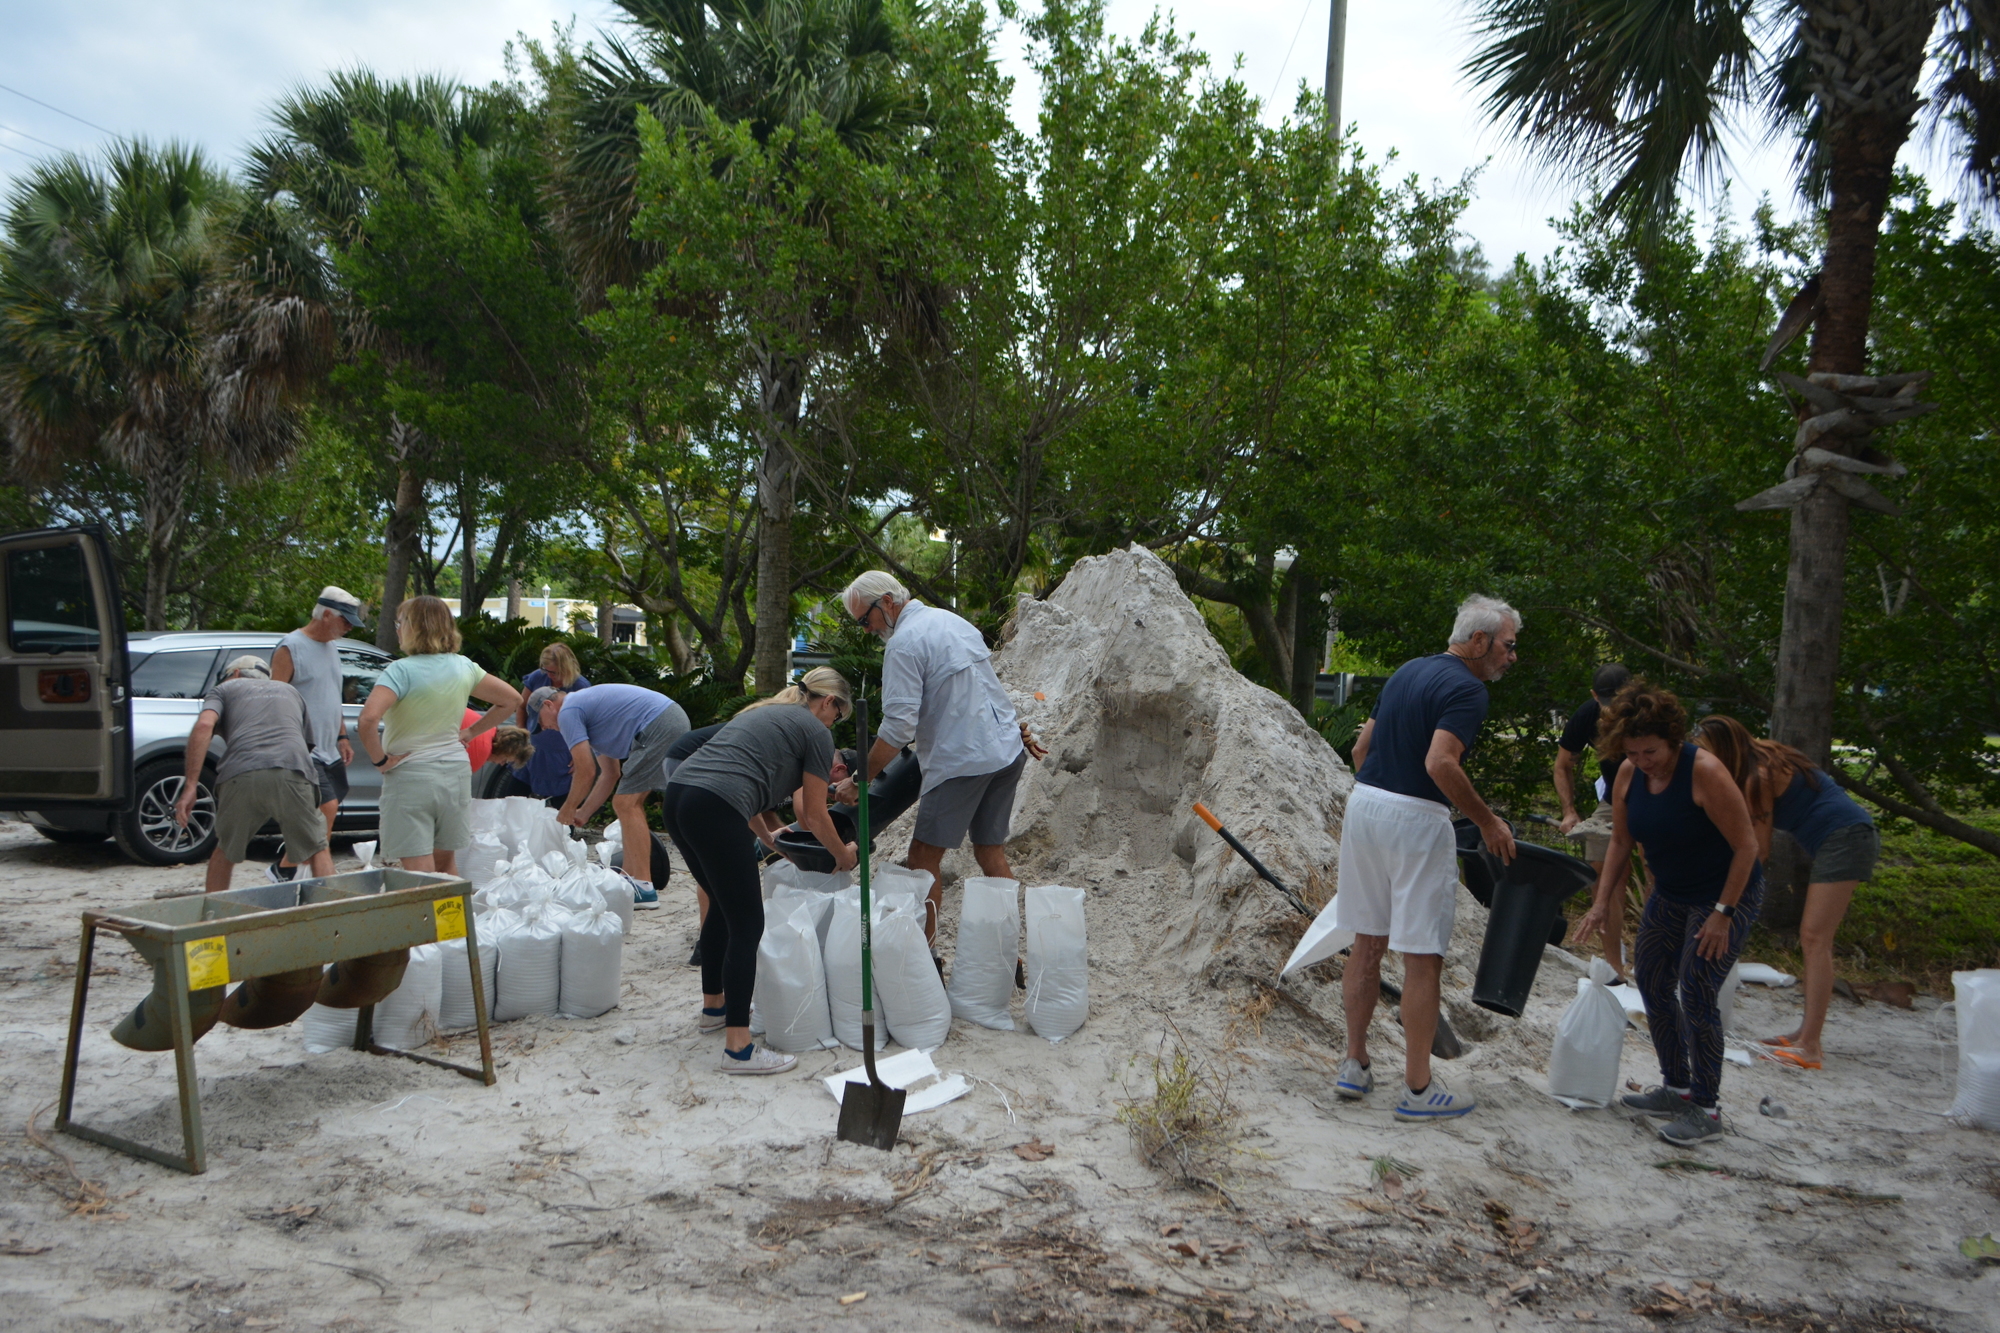 Longboat Key residents gather at the Broadway Beach Access on Sunday to fill sandbags. (Photo by Lauren Tronstad)